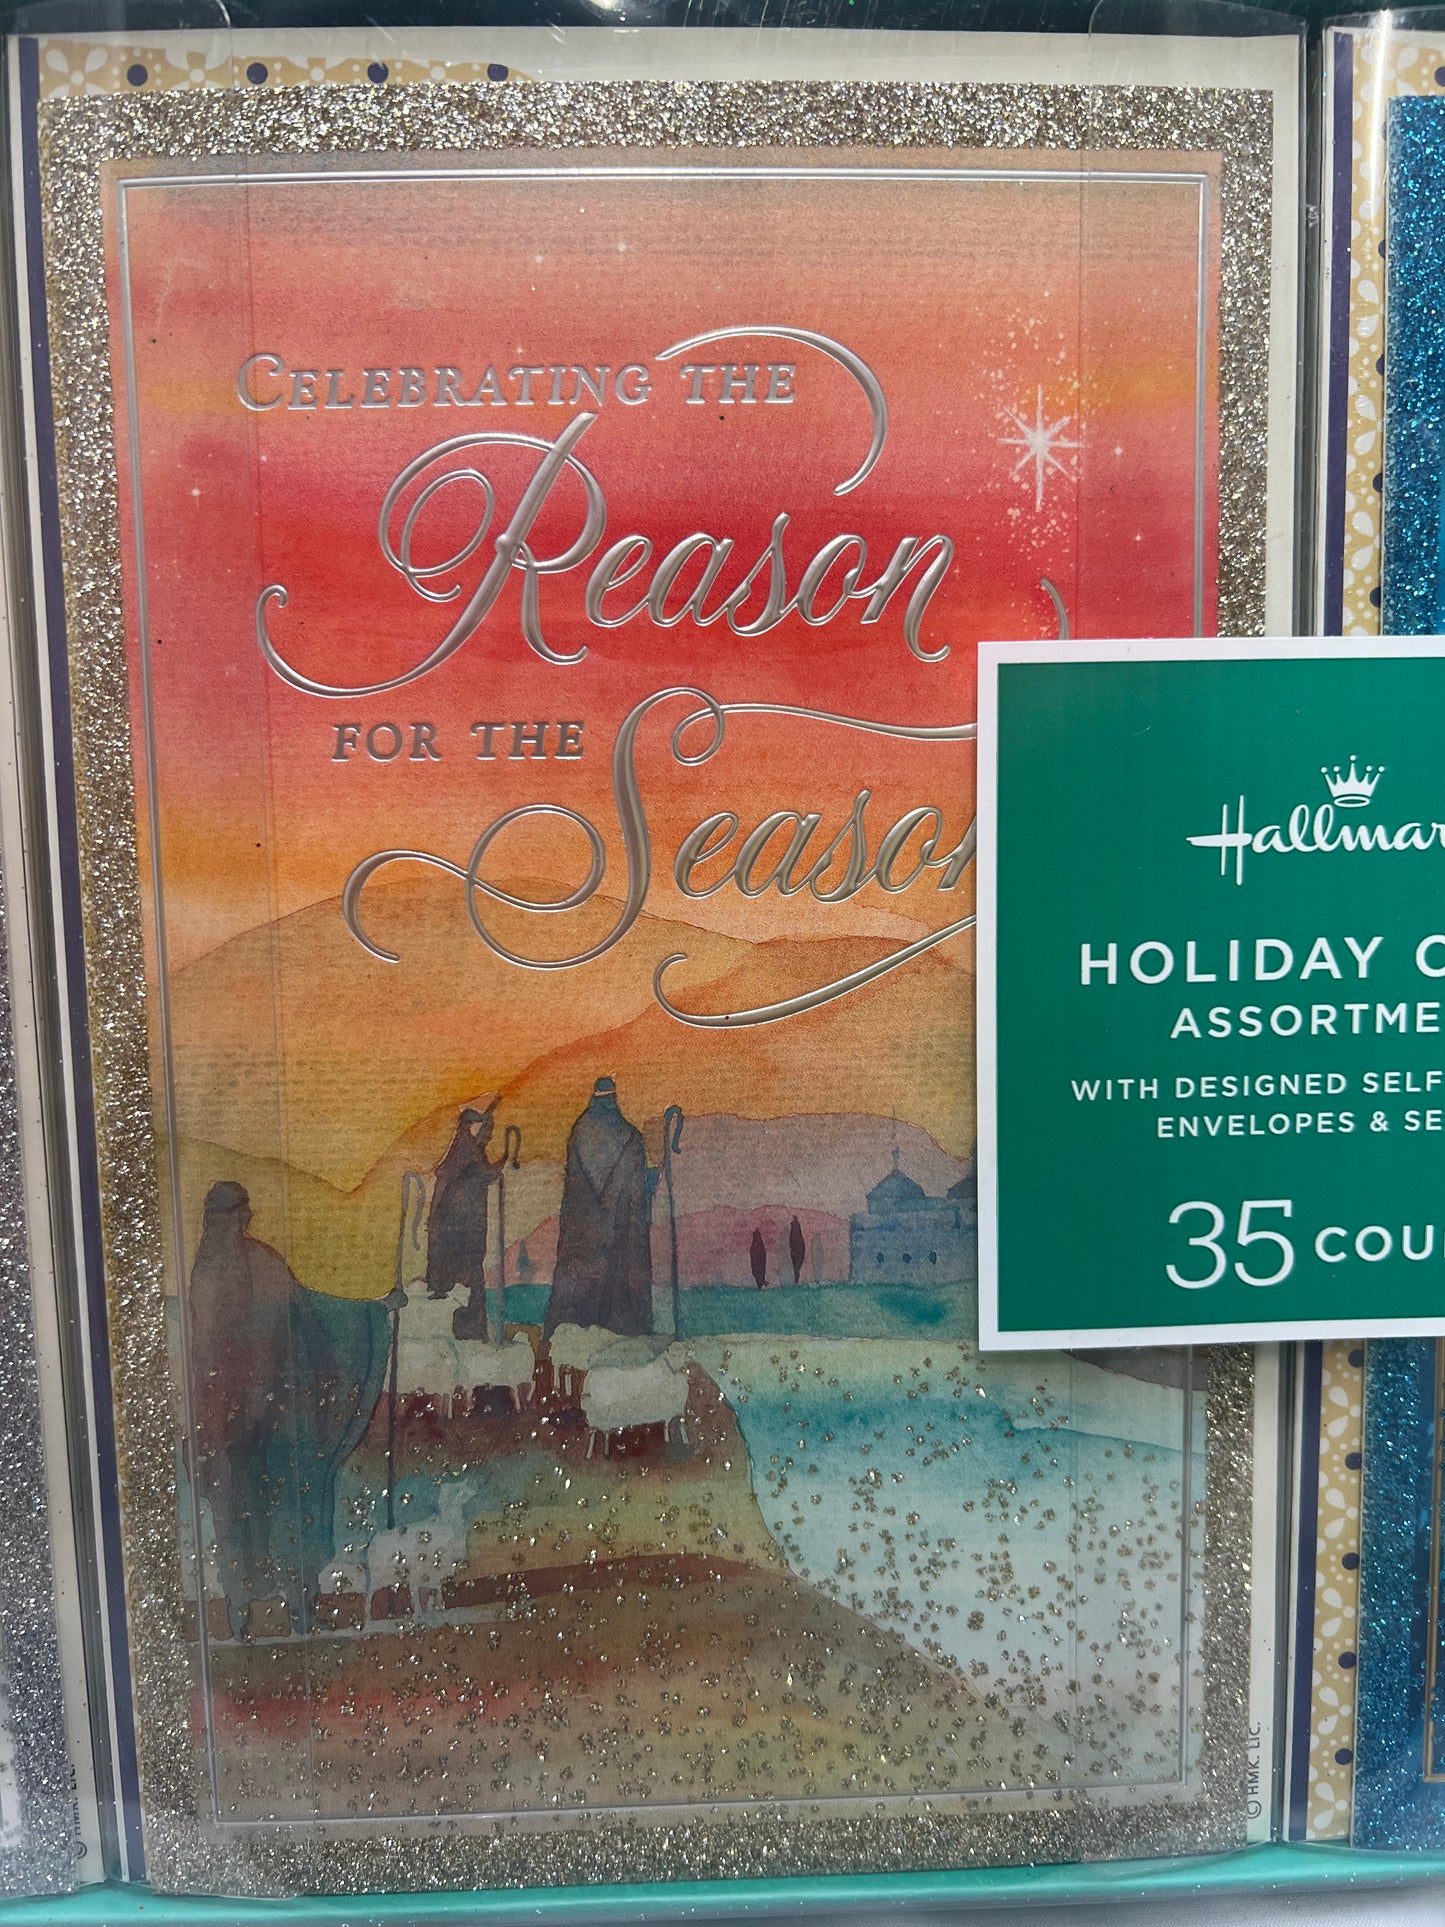 Hallmark 35 Holiday Card Assortment with Designed Self-Sealing Envelopes & Seal